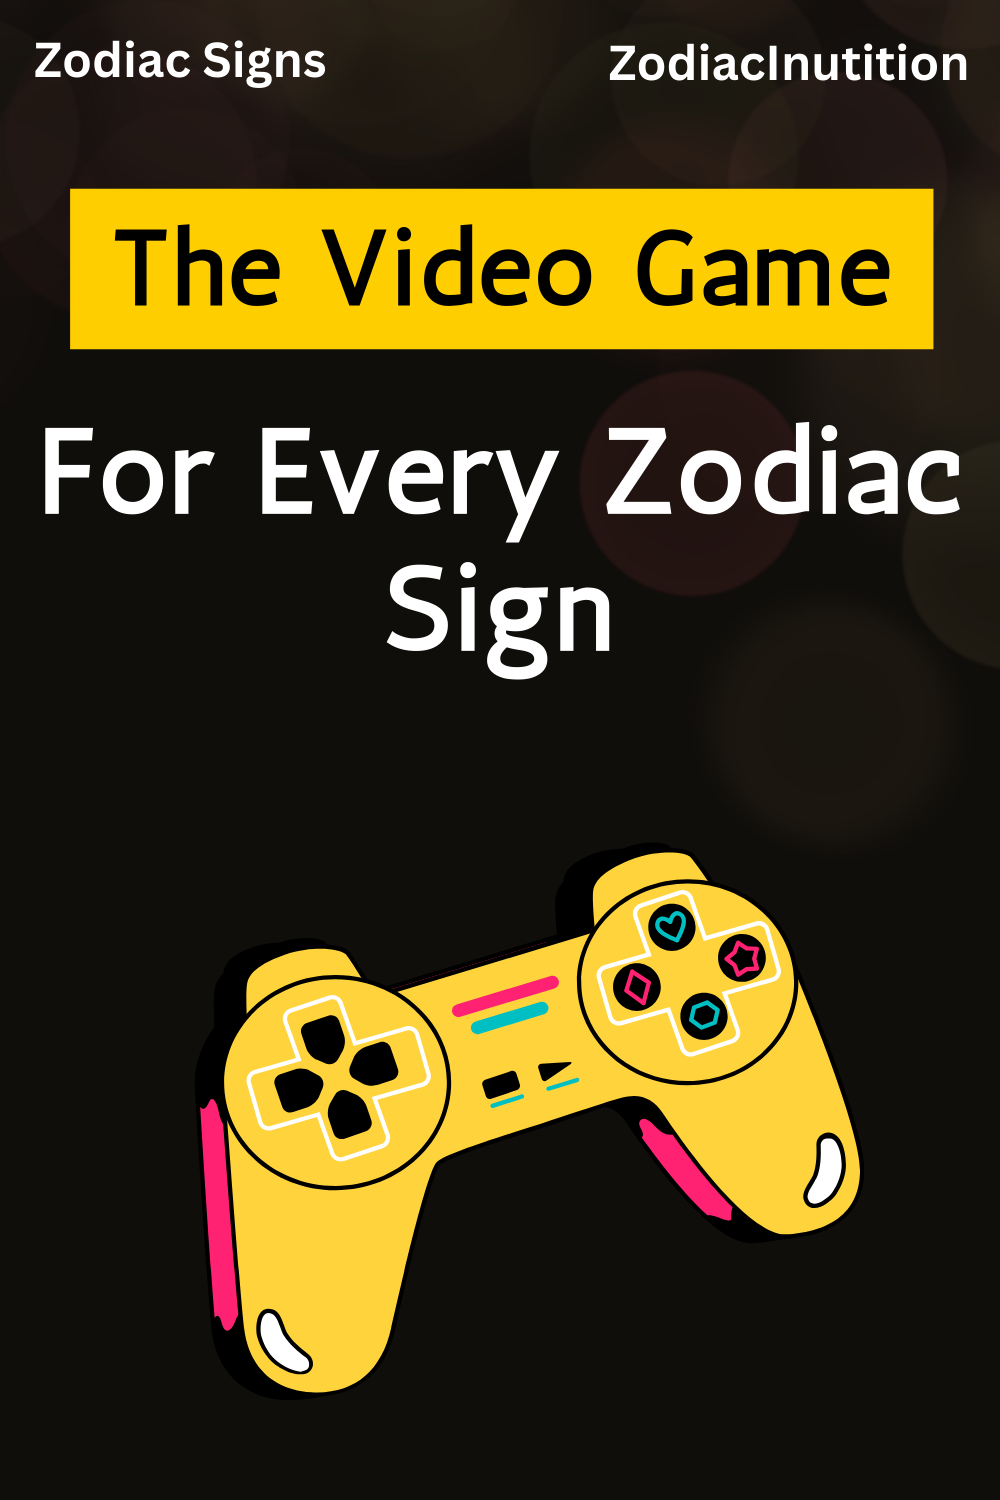 The Video Game For Every Zodiac Sign